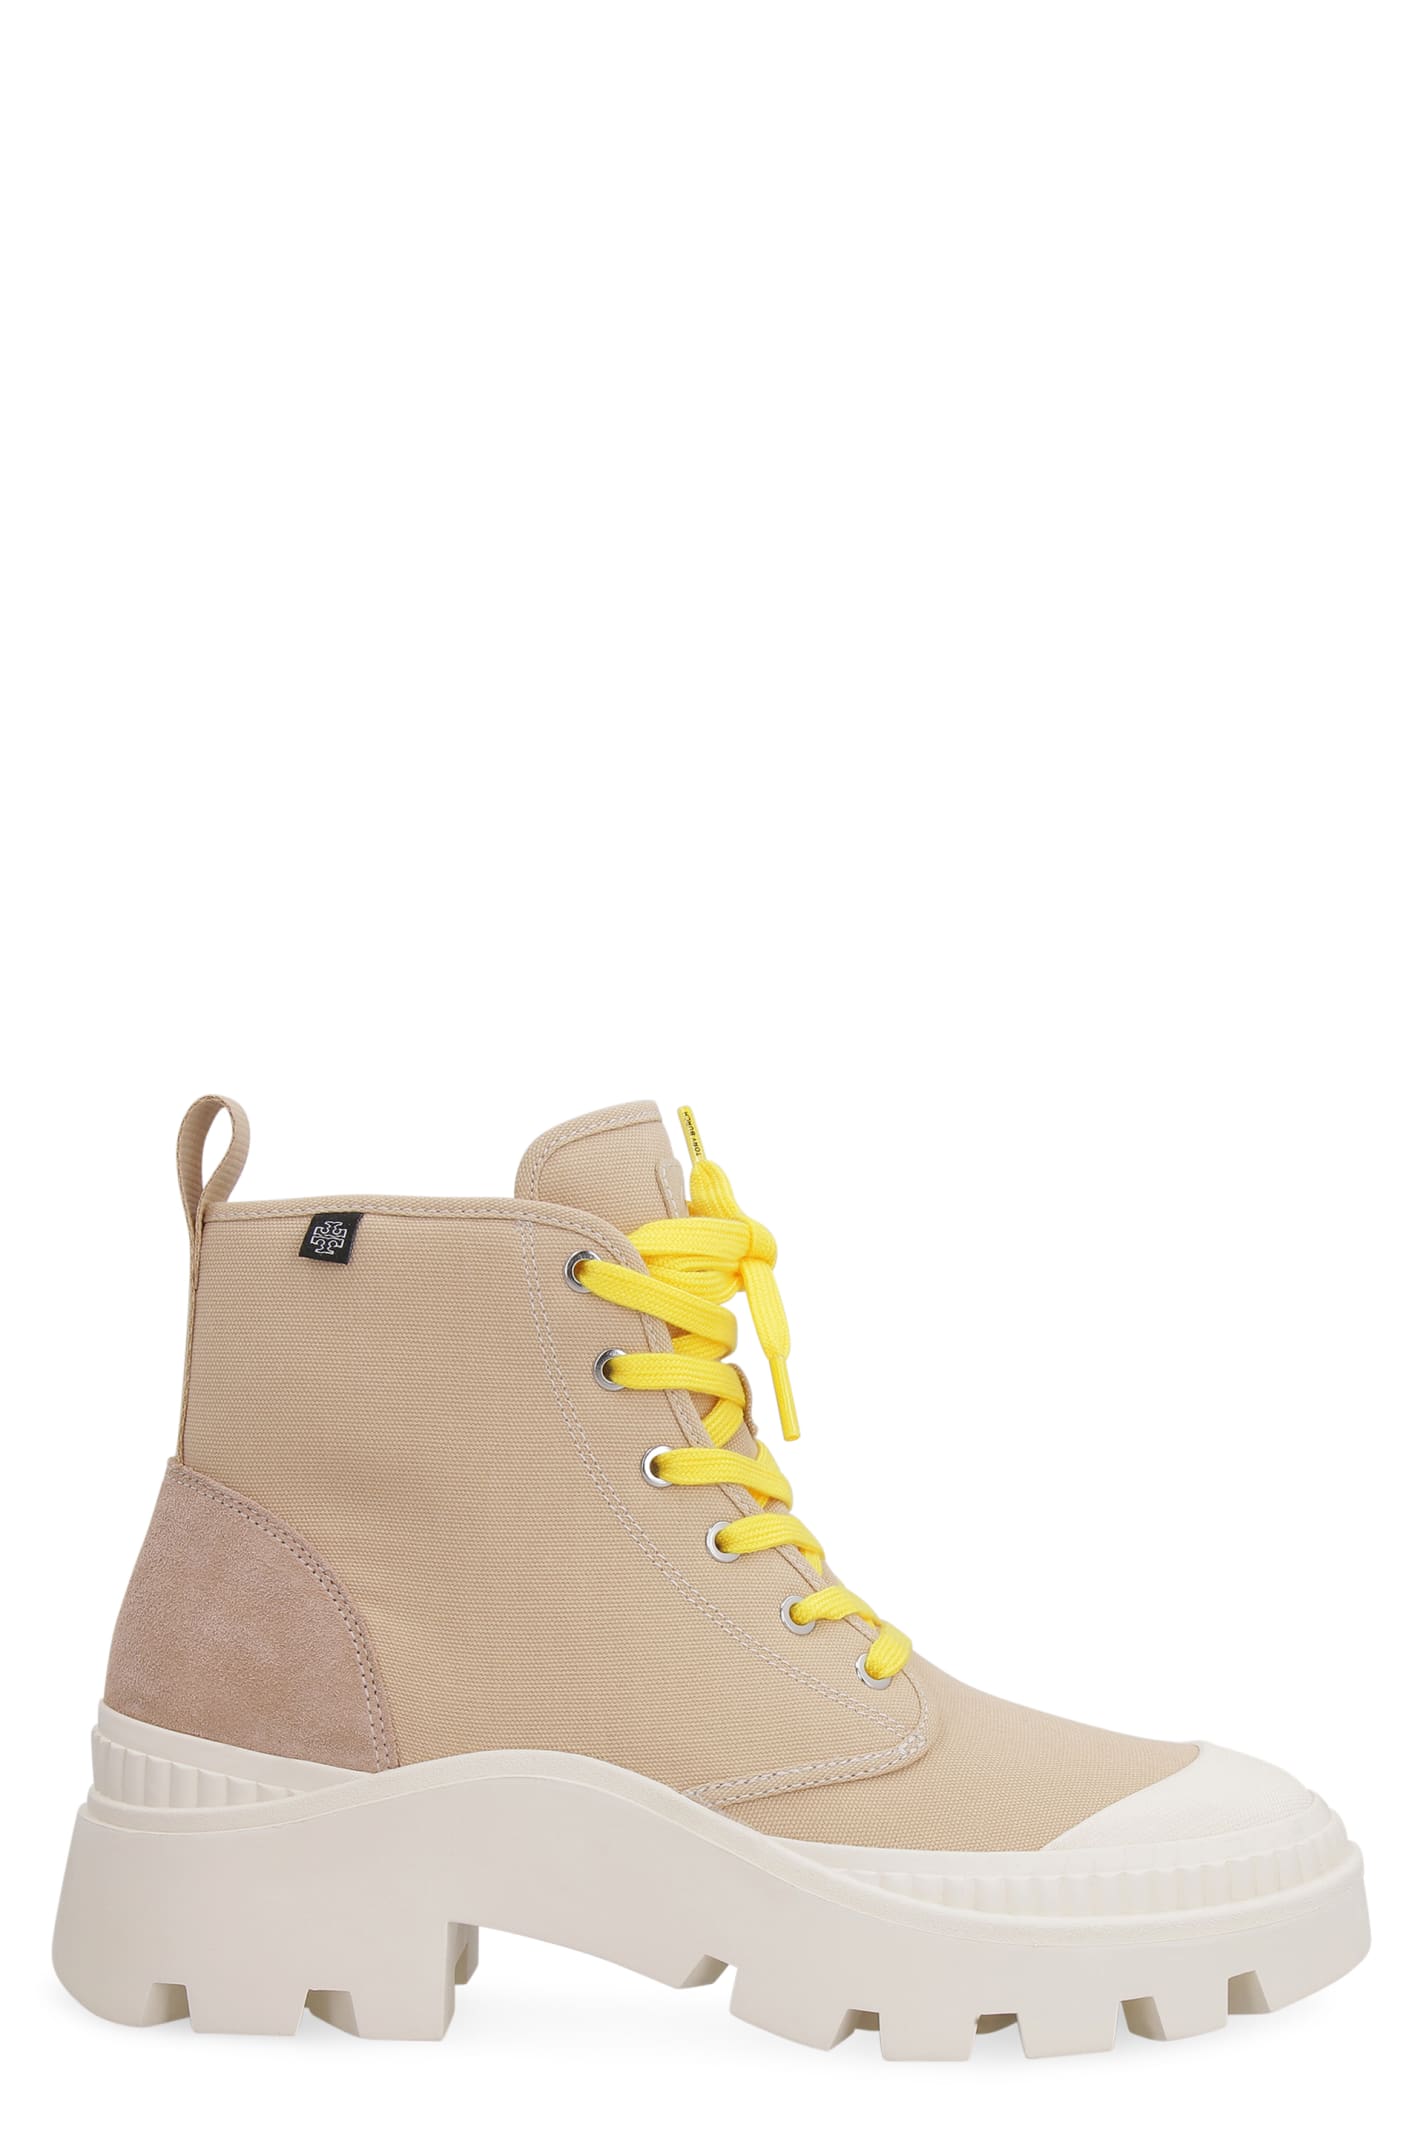 Tory Burch Camp Lace-up Ankle Boots